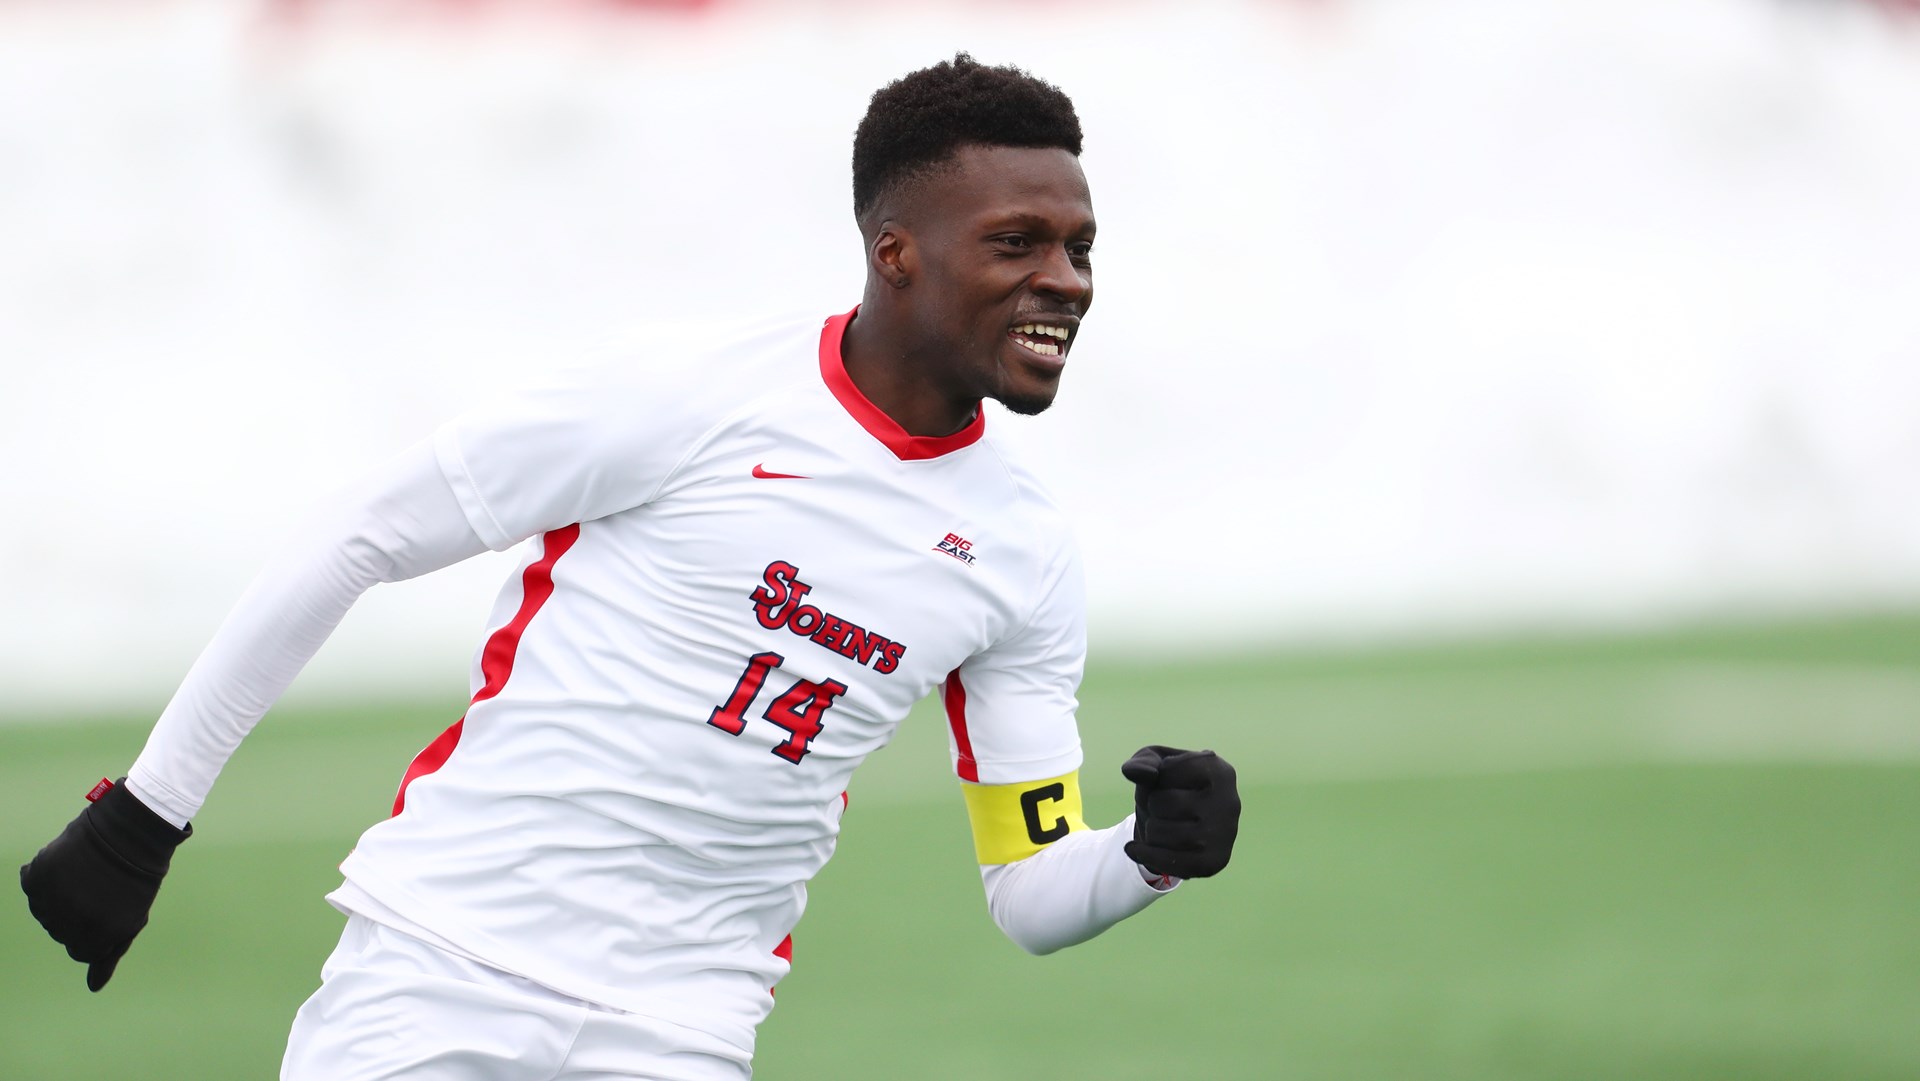 Canadian draftees eye up MLS chance